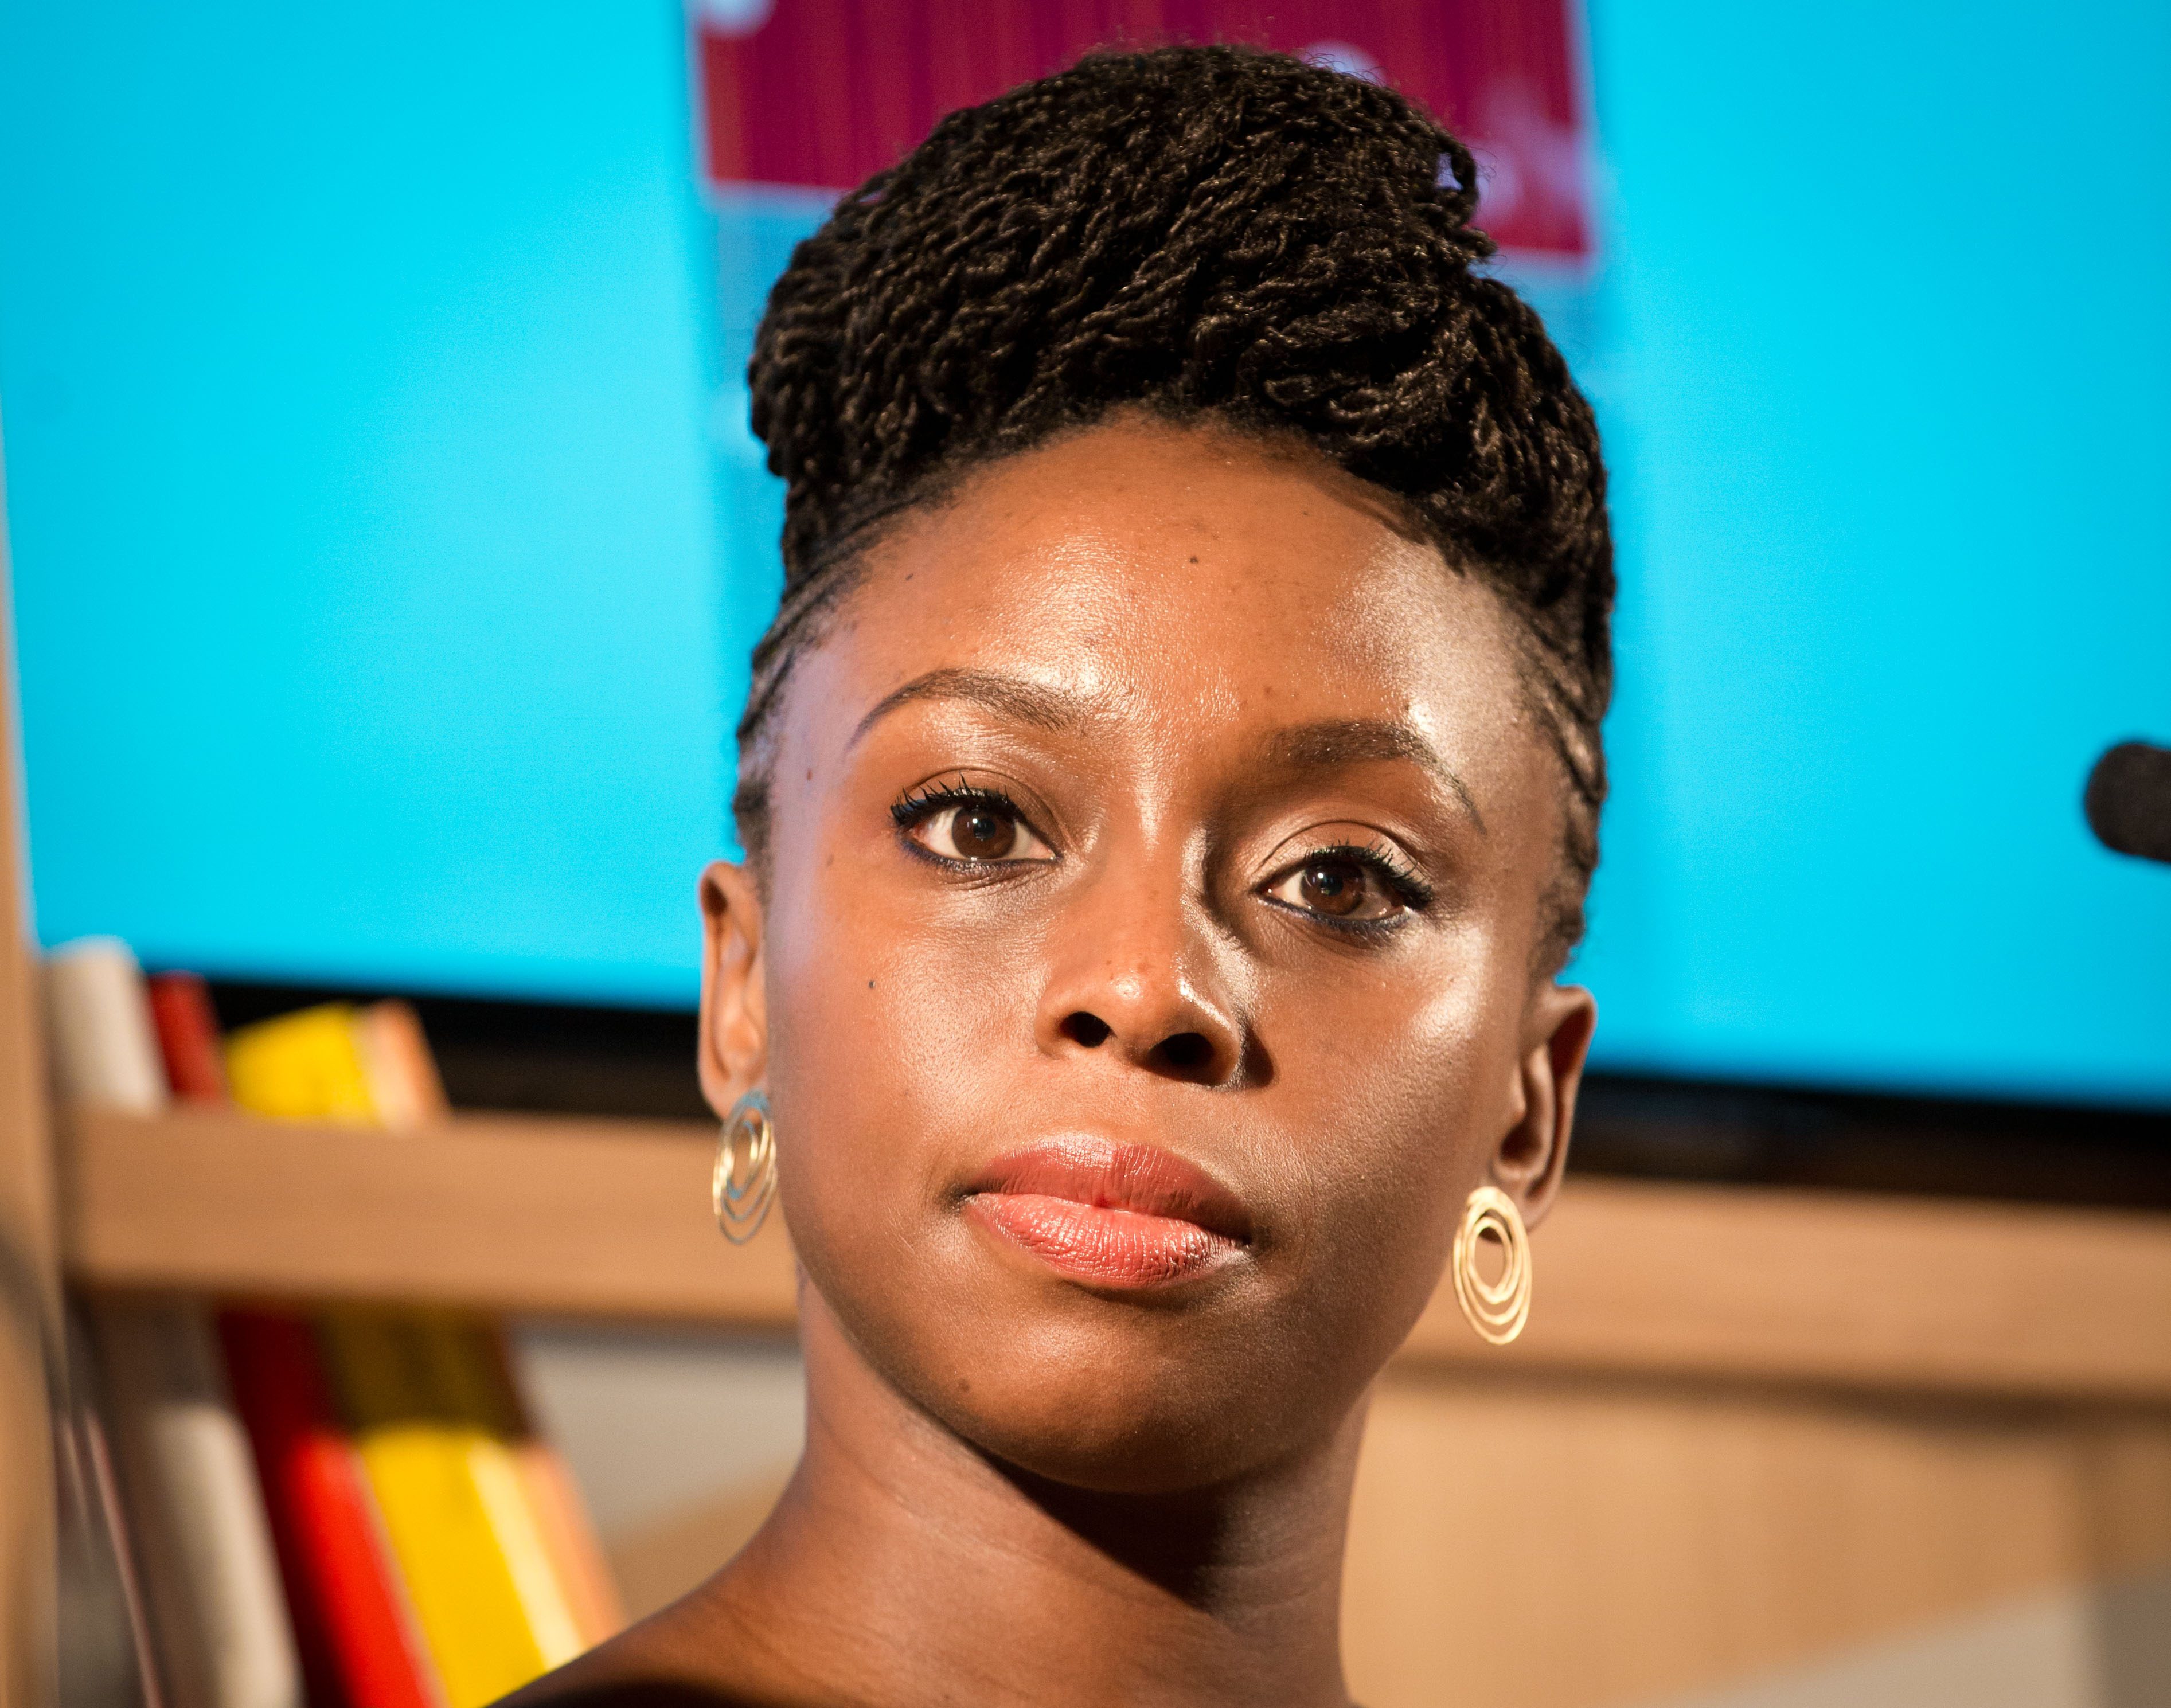 Nigerian born writer Chimamanda Ngozi Adichie, pictured in Frankfurt in May 2014, has spoken out about how being a mother has changed her (Frank Rumpenhorst—Frank Rumpenhorst/picture-alliance/dpa/AP Images)